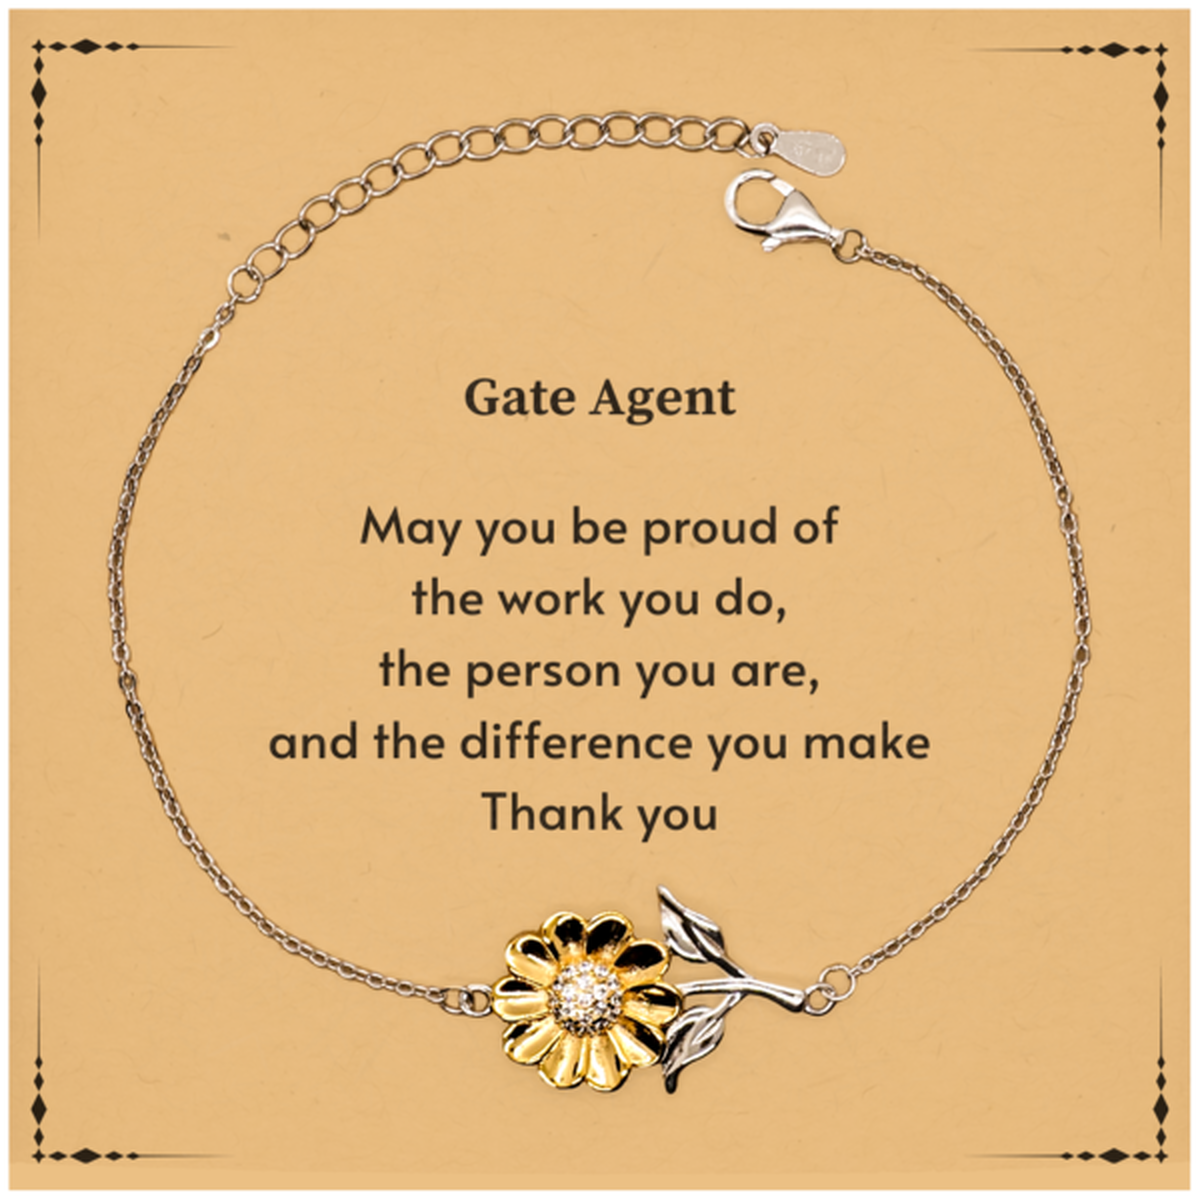 Heartwarming Sunflower Bracelet Retirement Coworkers Gifts for Gate Agent, Gate Agent May You be proud of the work you do, the person you are Gifts for Boss Men Women Friends